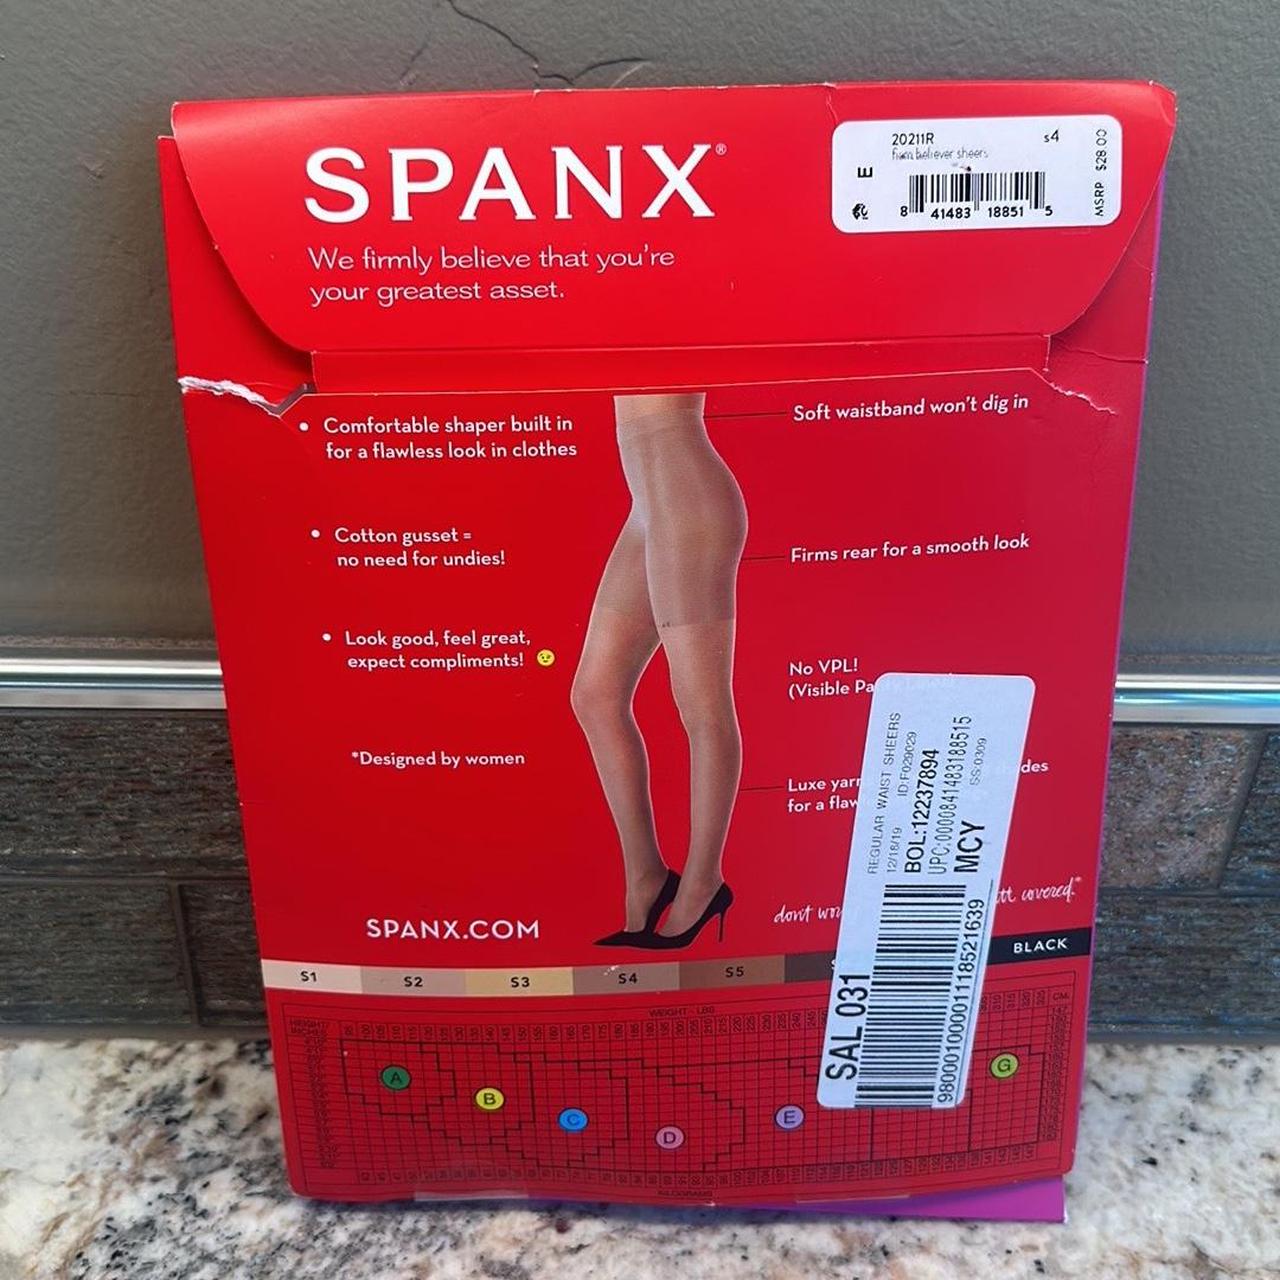 SPANX Firm Believer Shaping Sheers Pantyhose E - Depop